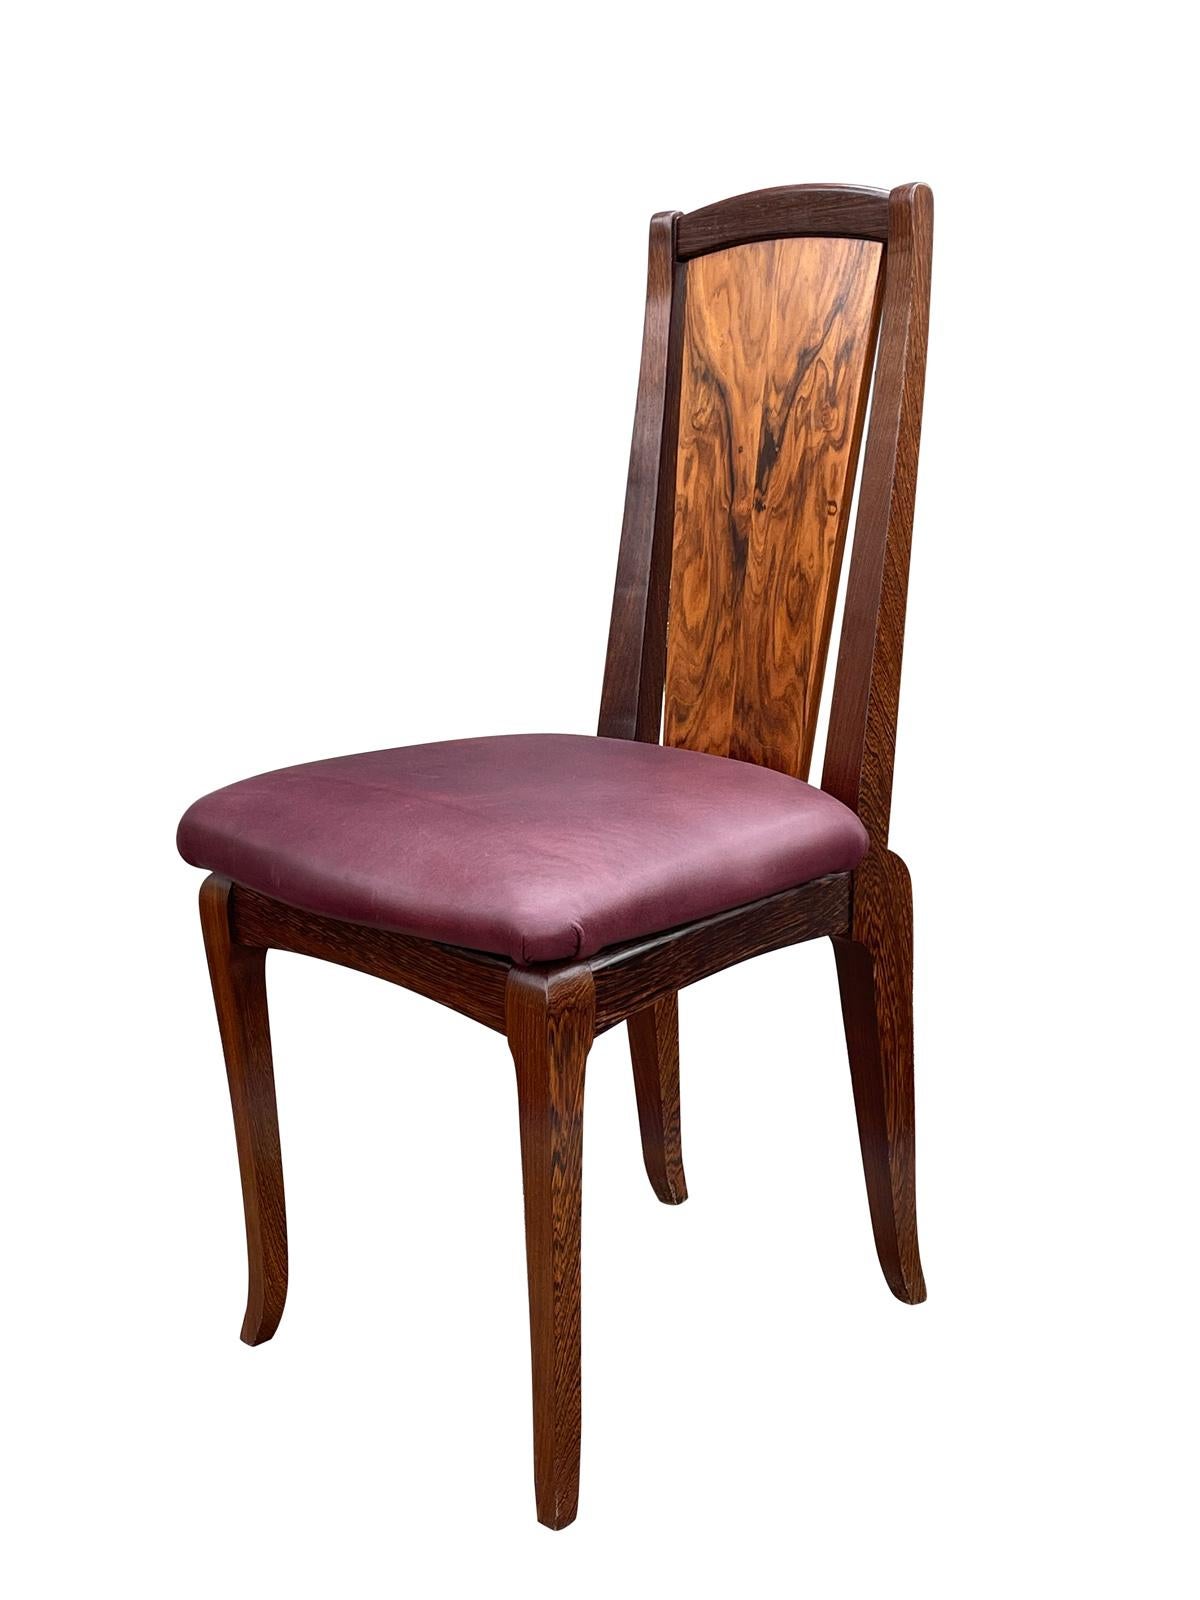 American 1990s Morado Rosewood & Leather Dining Chairs in the Manner of Nakashima